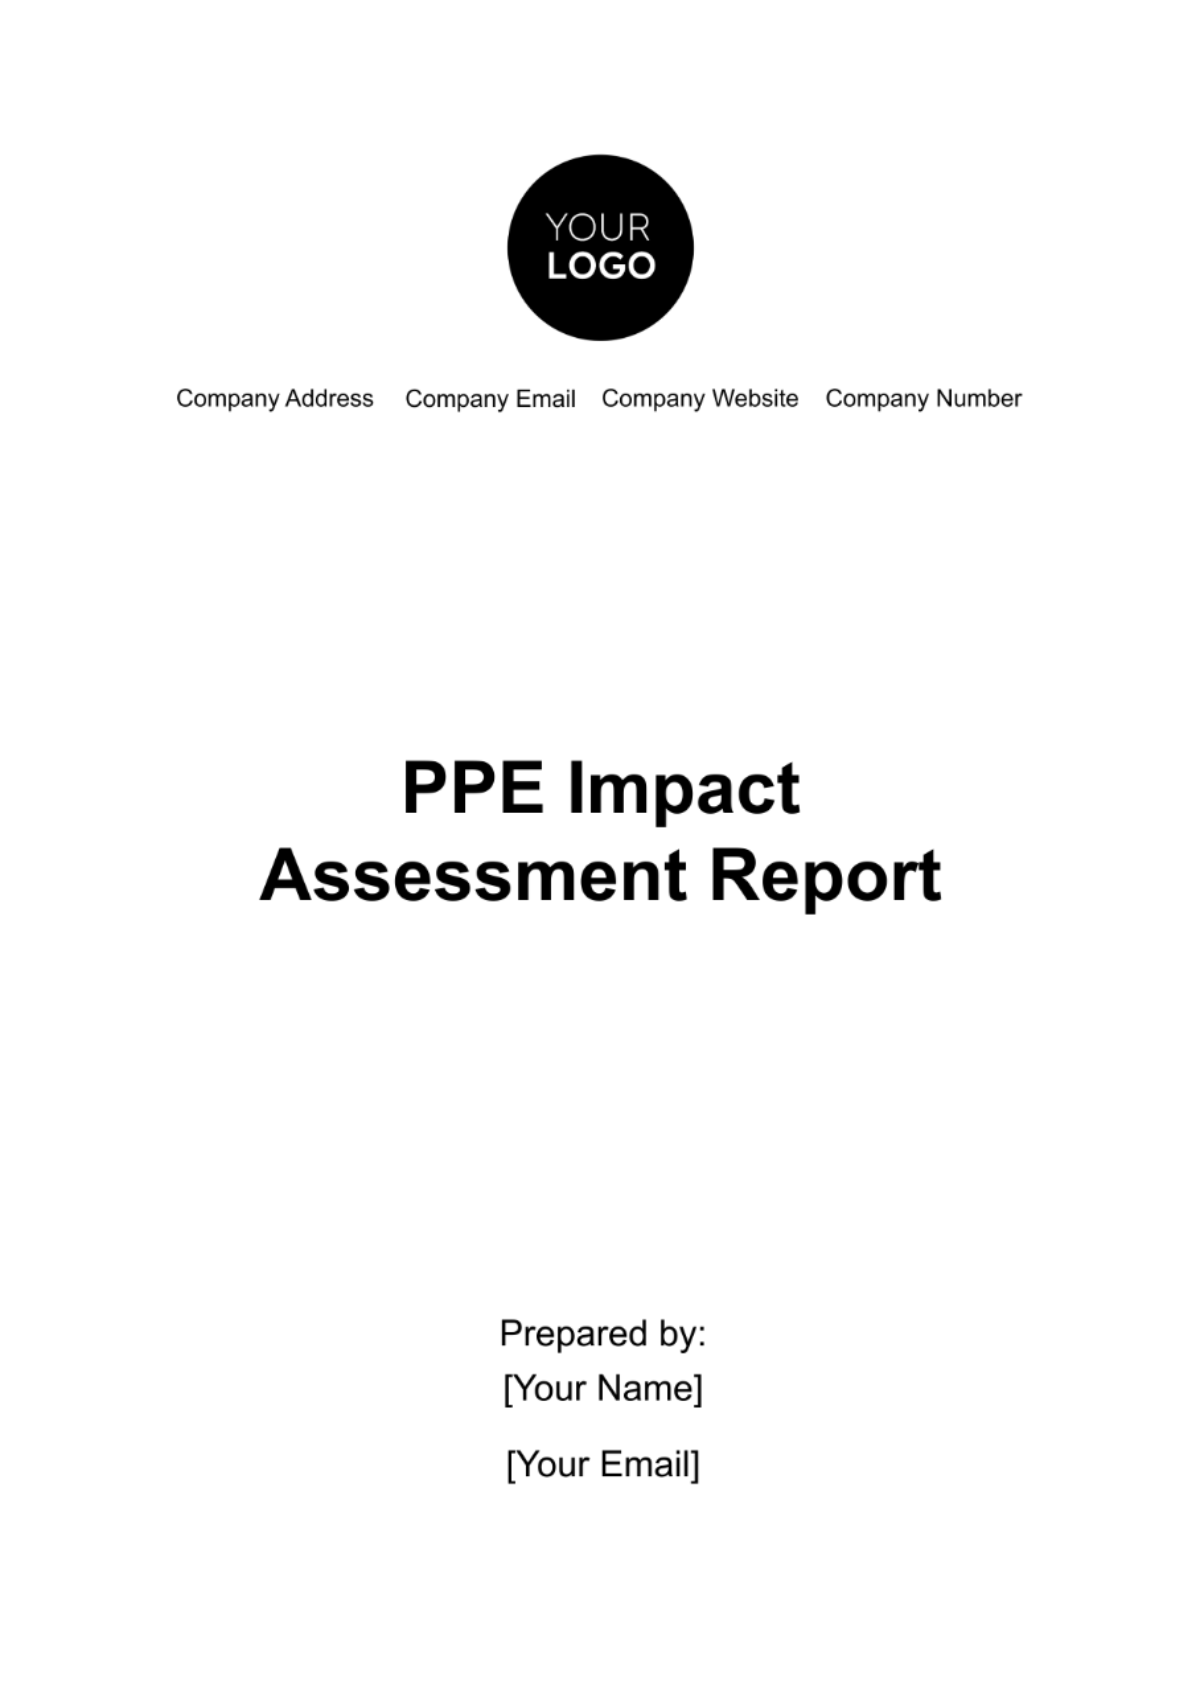 PPE Impact Assessment Report Template